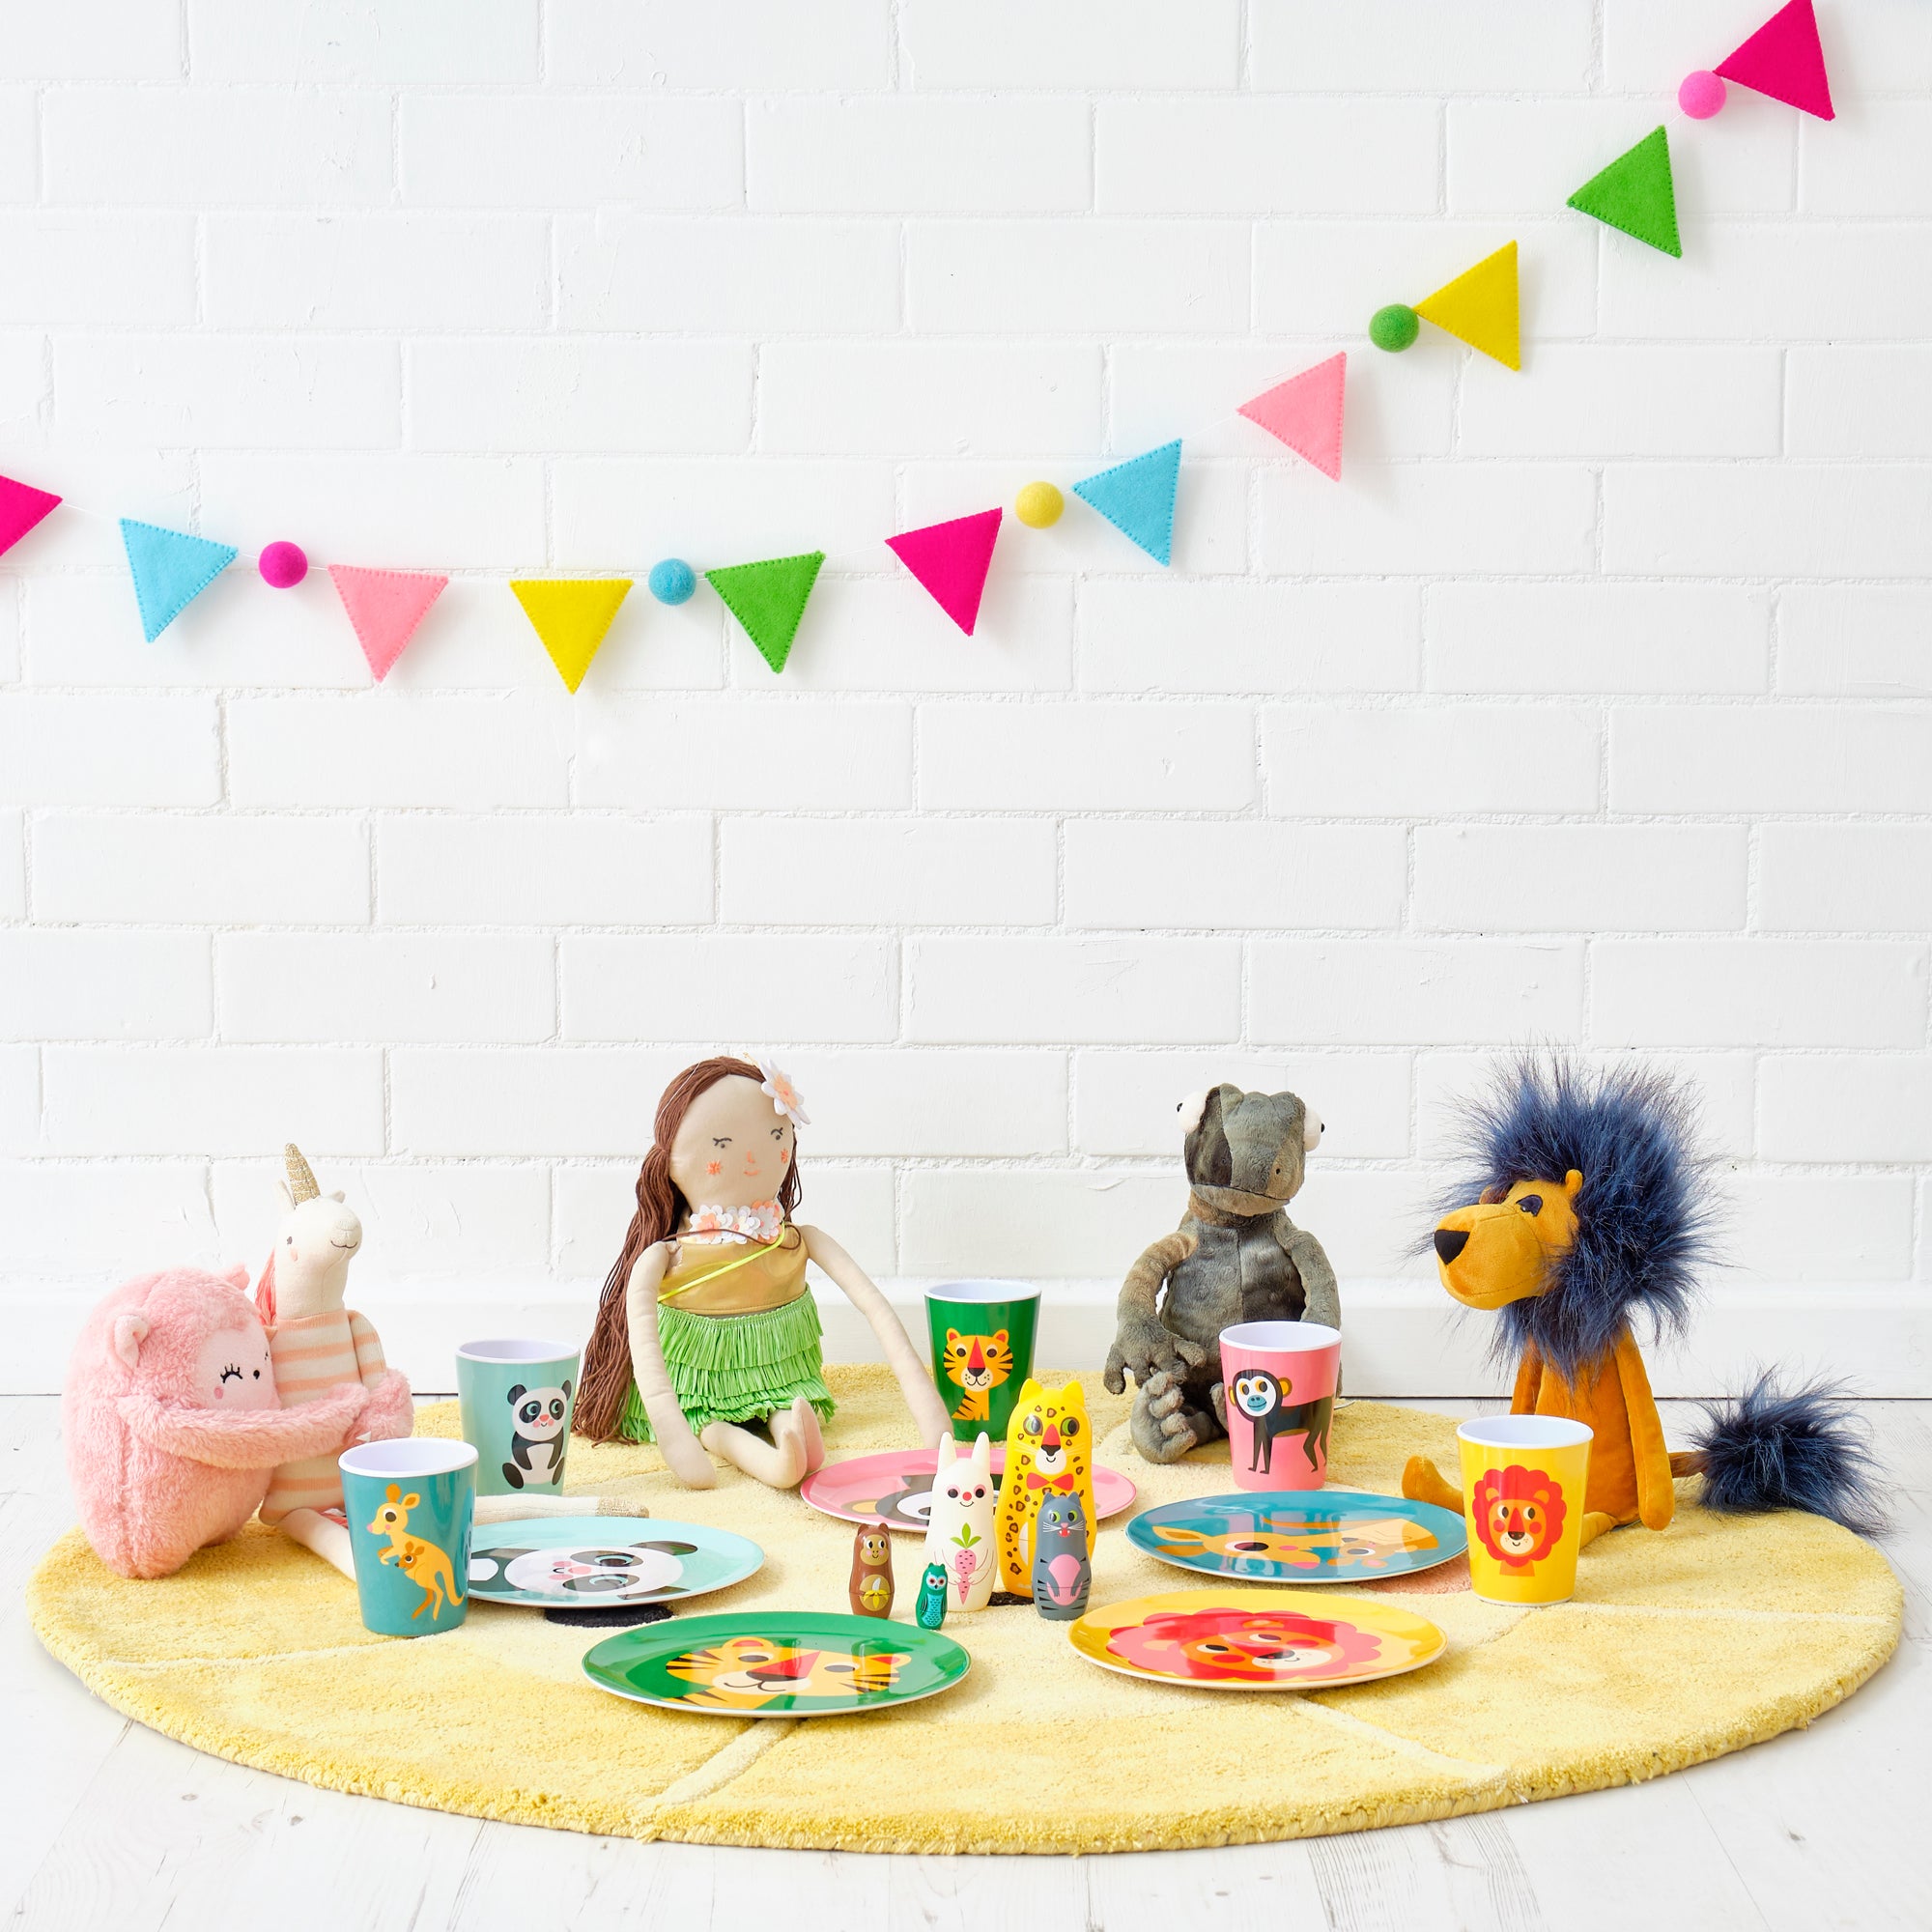 Tableware and Toys, styled by Bobby Rabbit.